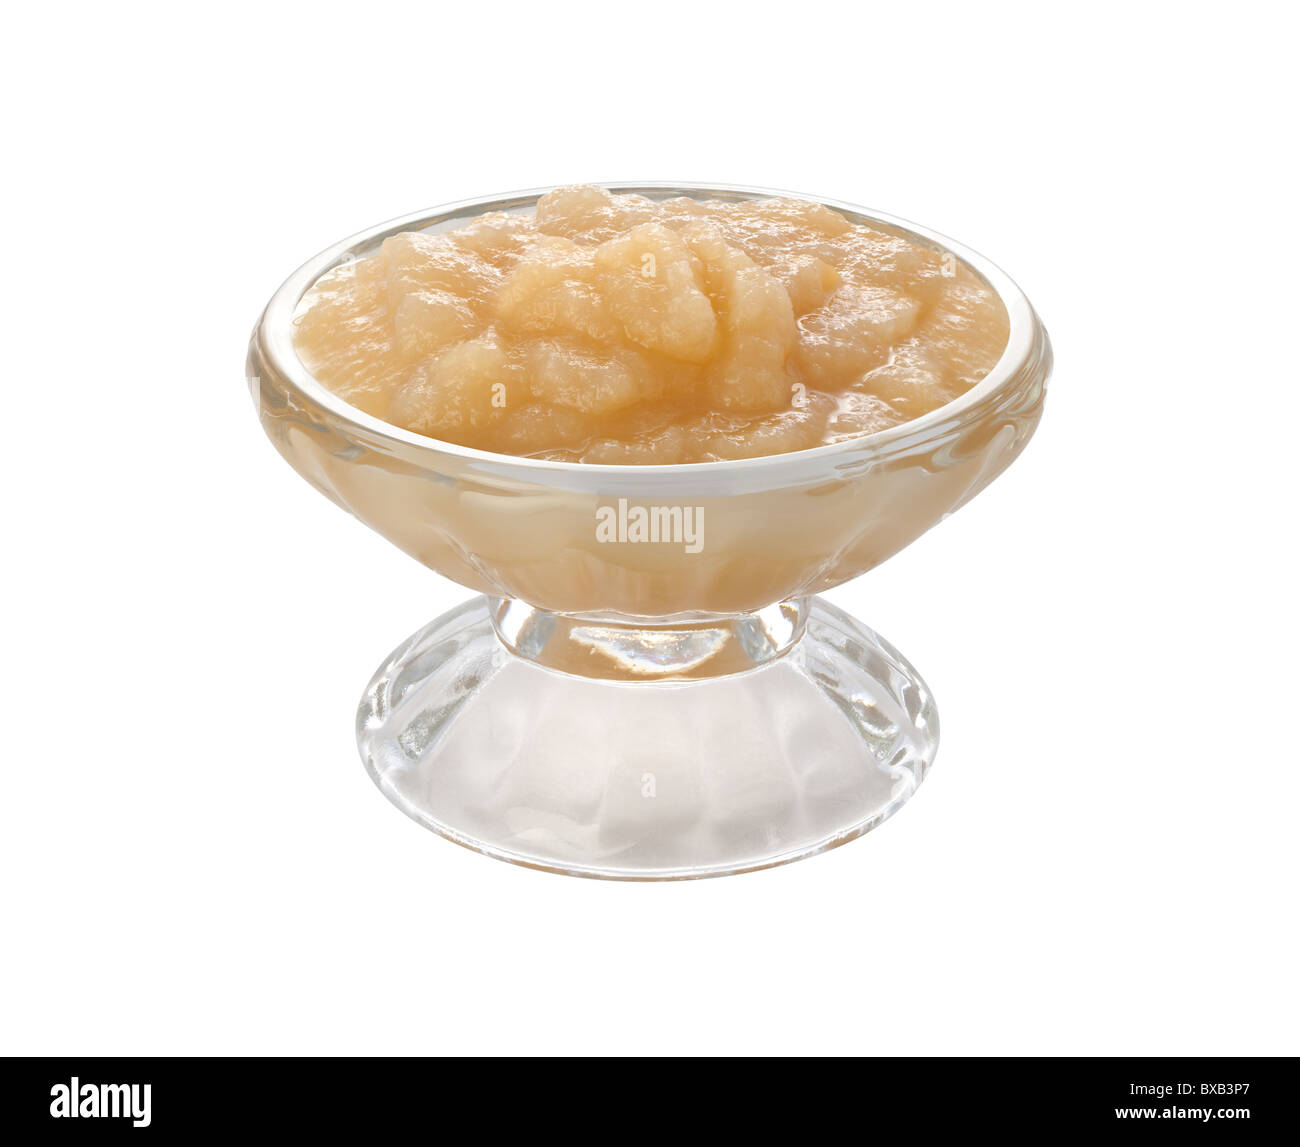 Applesauce in a Glass Bowl isolated on a white background. Stock Photo